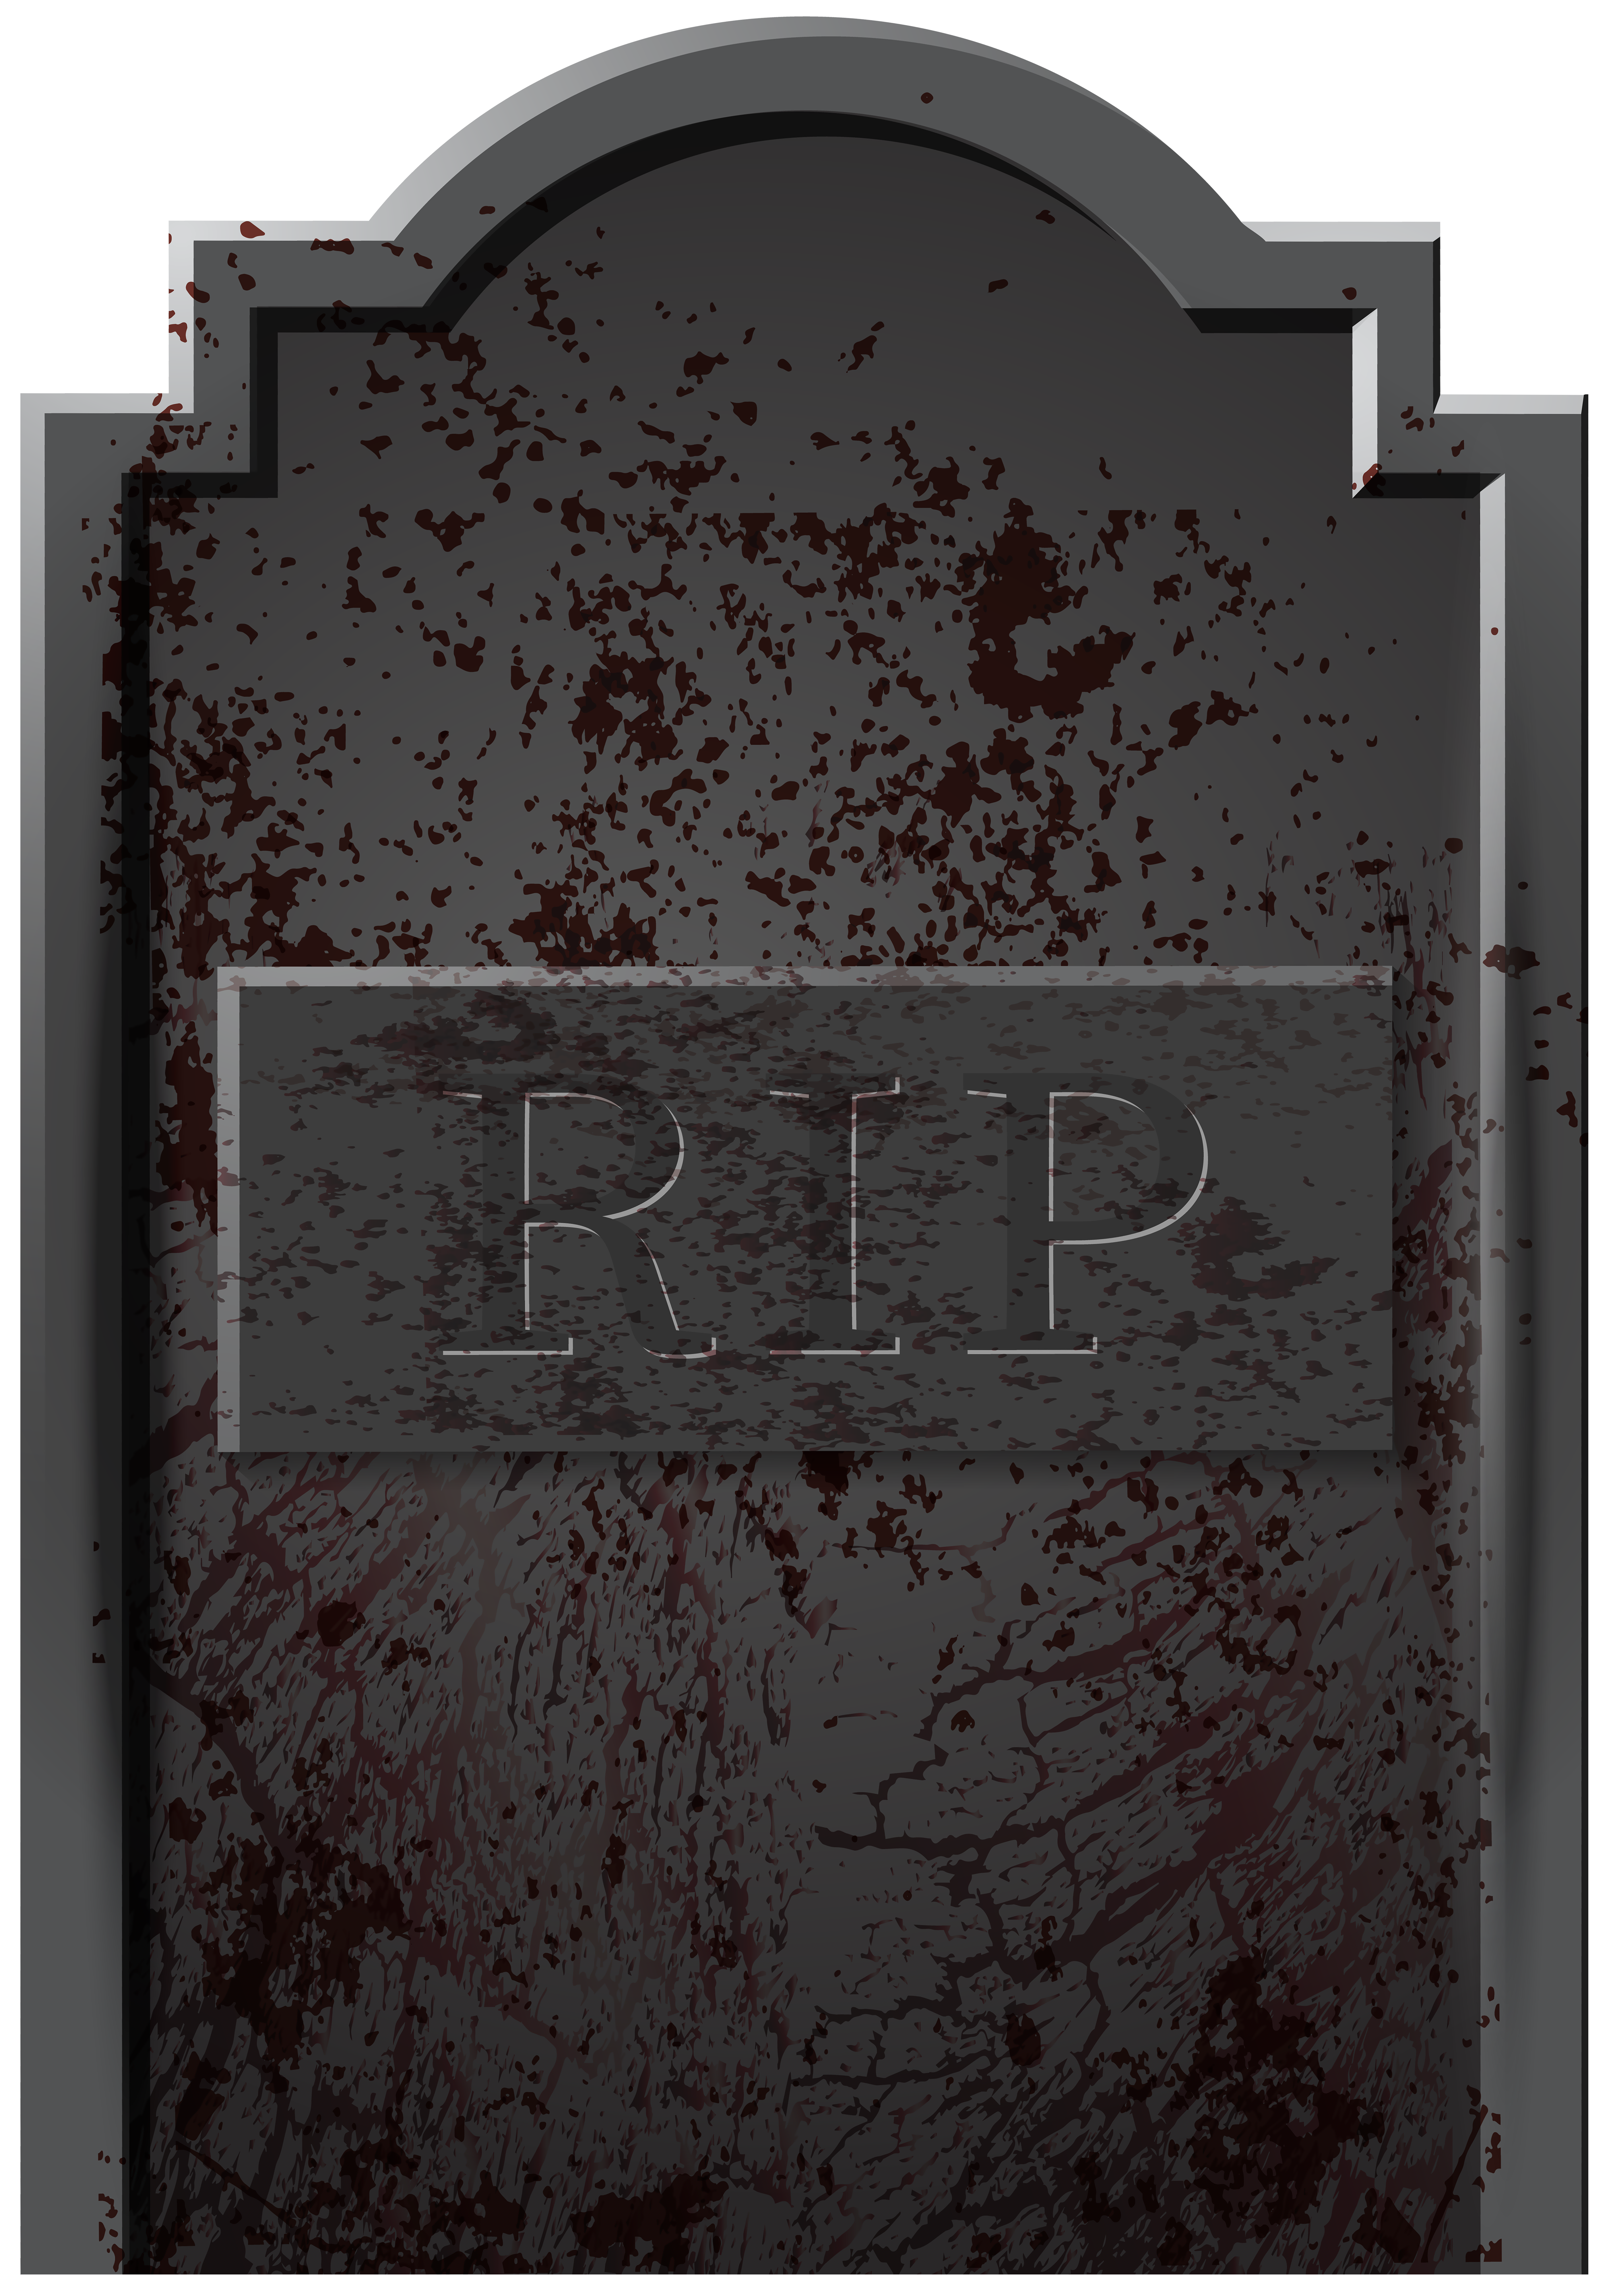 RIP Tombstone PNG Clipart​  Gallery Yopriceville - High-Quality Free  Images and Transparent PNG Clipart